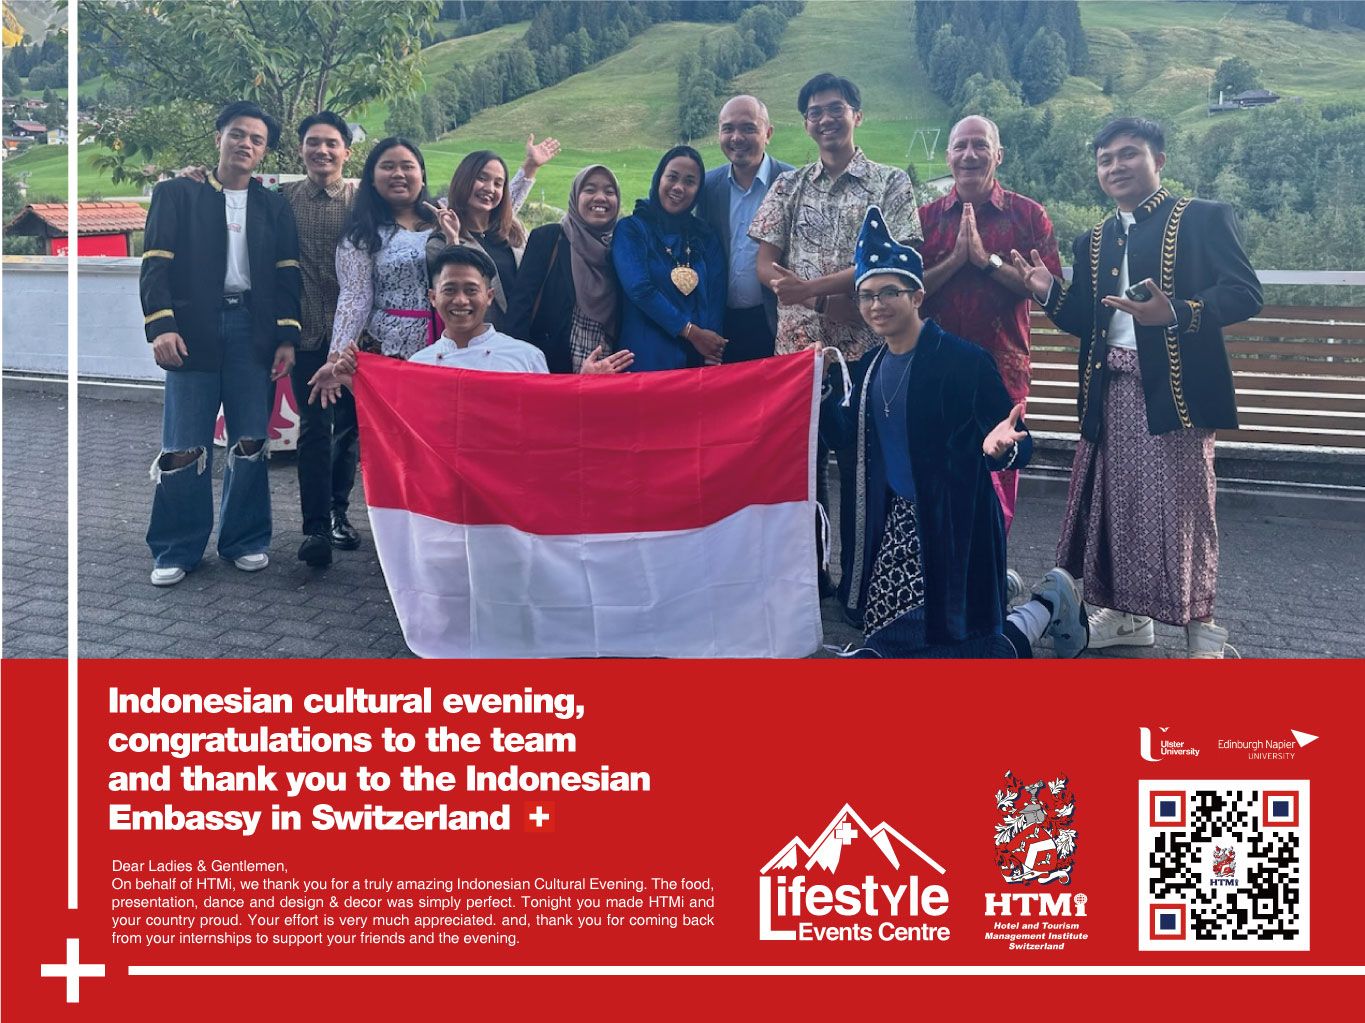 Indonesian cultural evening, congratulations to the team and thank you to the Indonesian Embassy in Switzerland